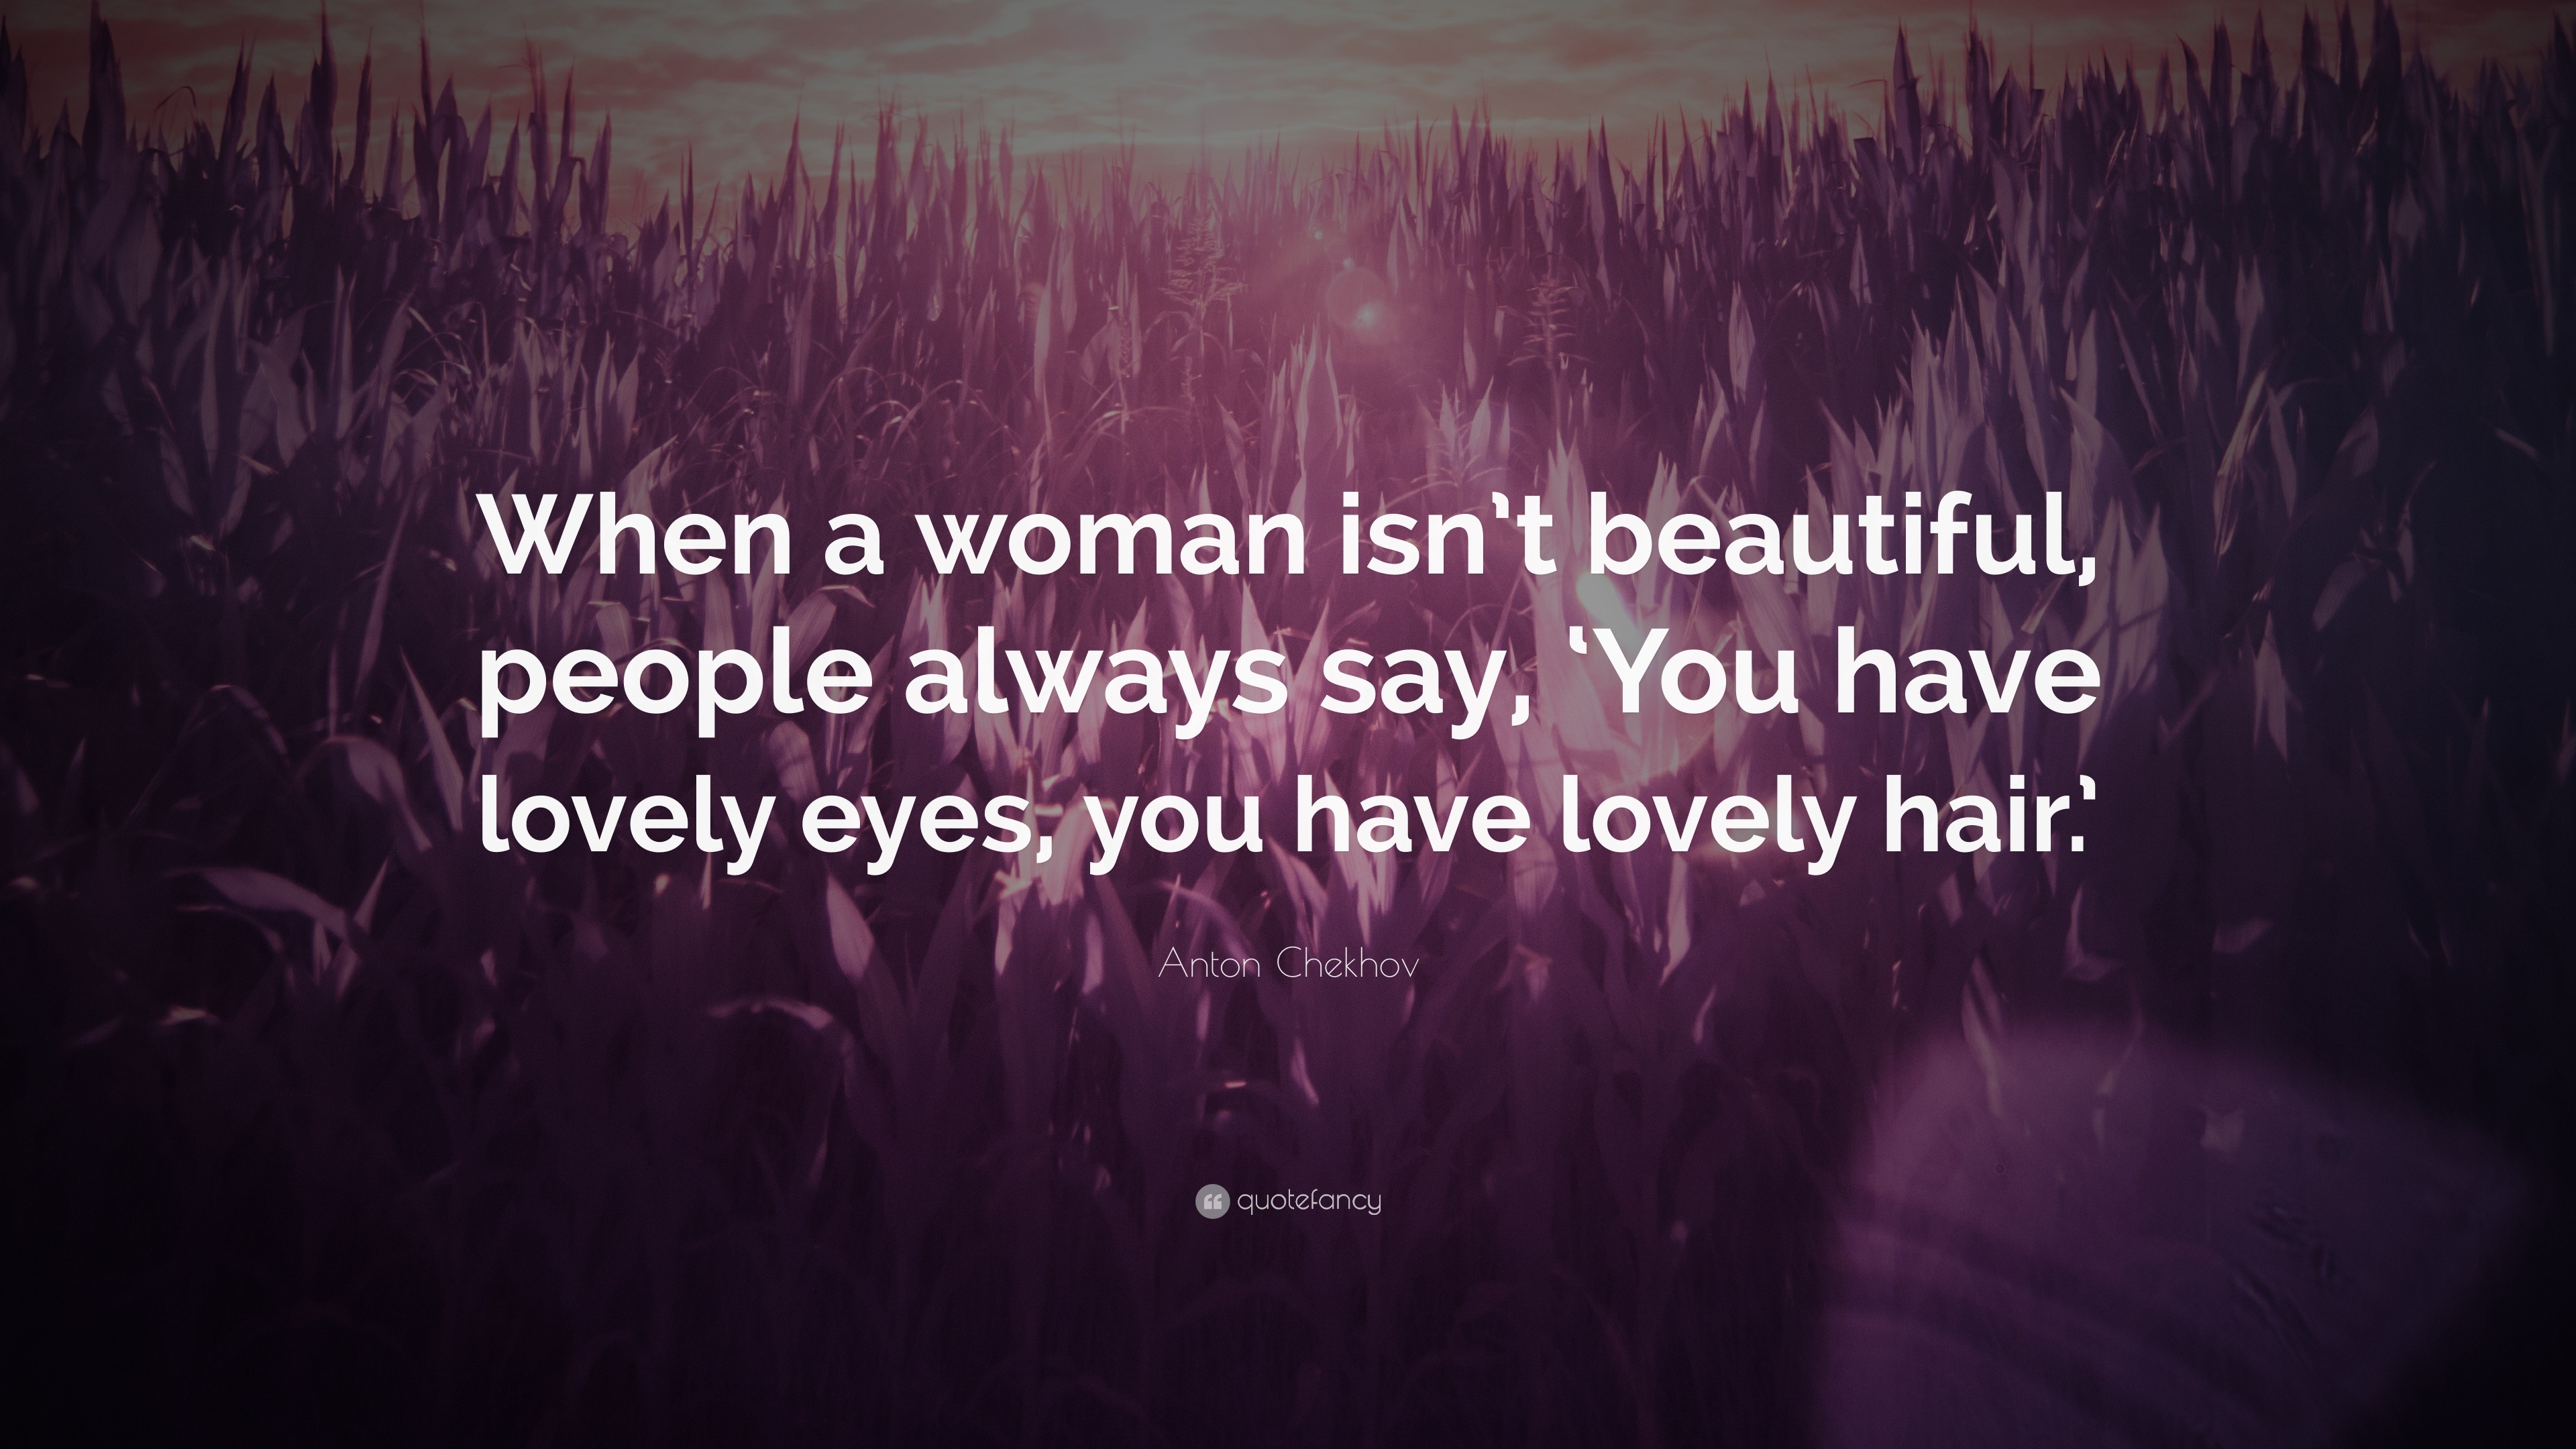 Anton Chekhov Quote: “When a woman isn’t beautiful, people always say ...